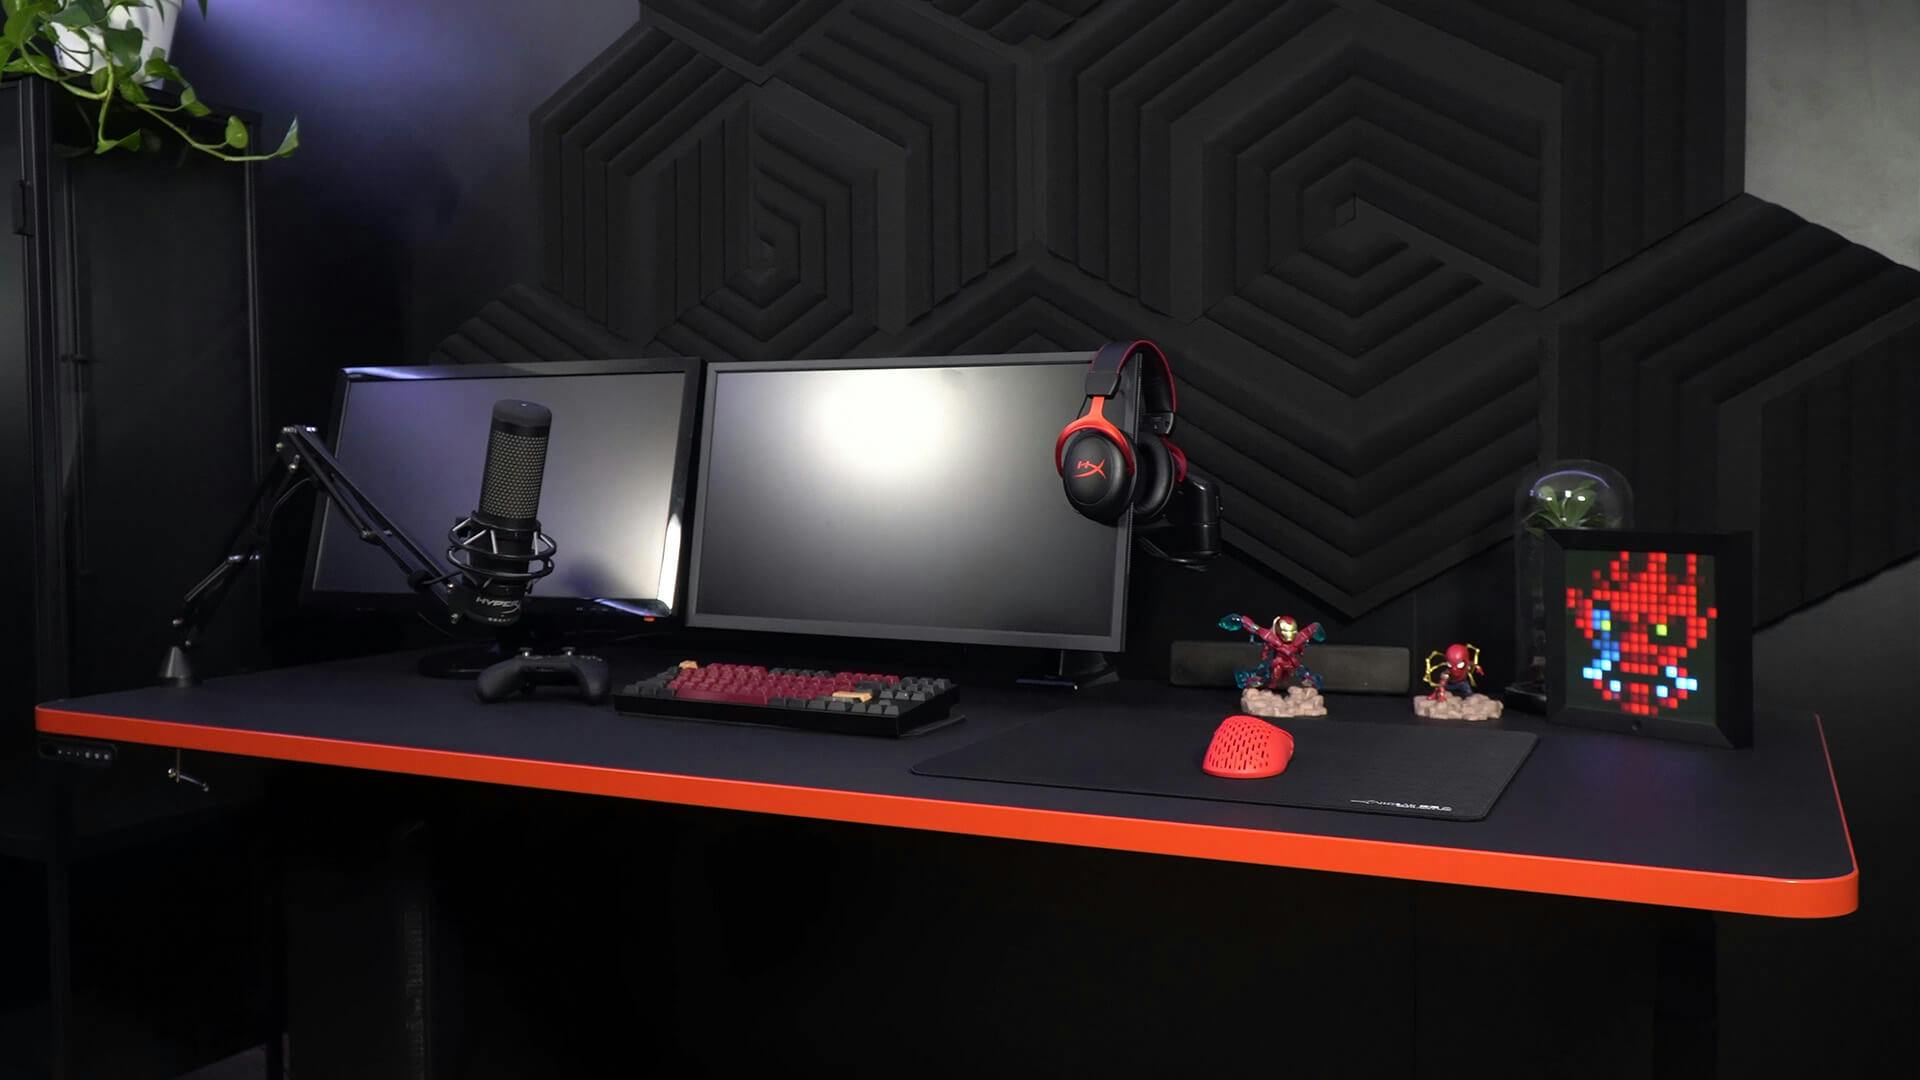 The 13 Cool Gaming Desk Accessories Every Gamer Must Have